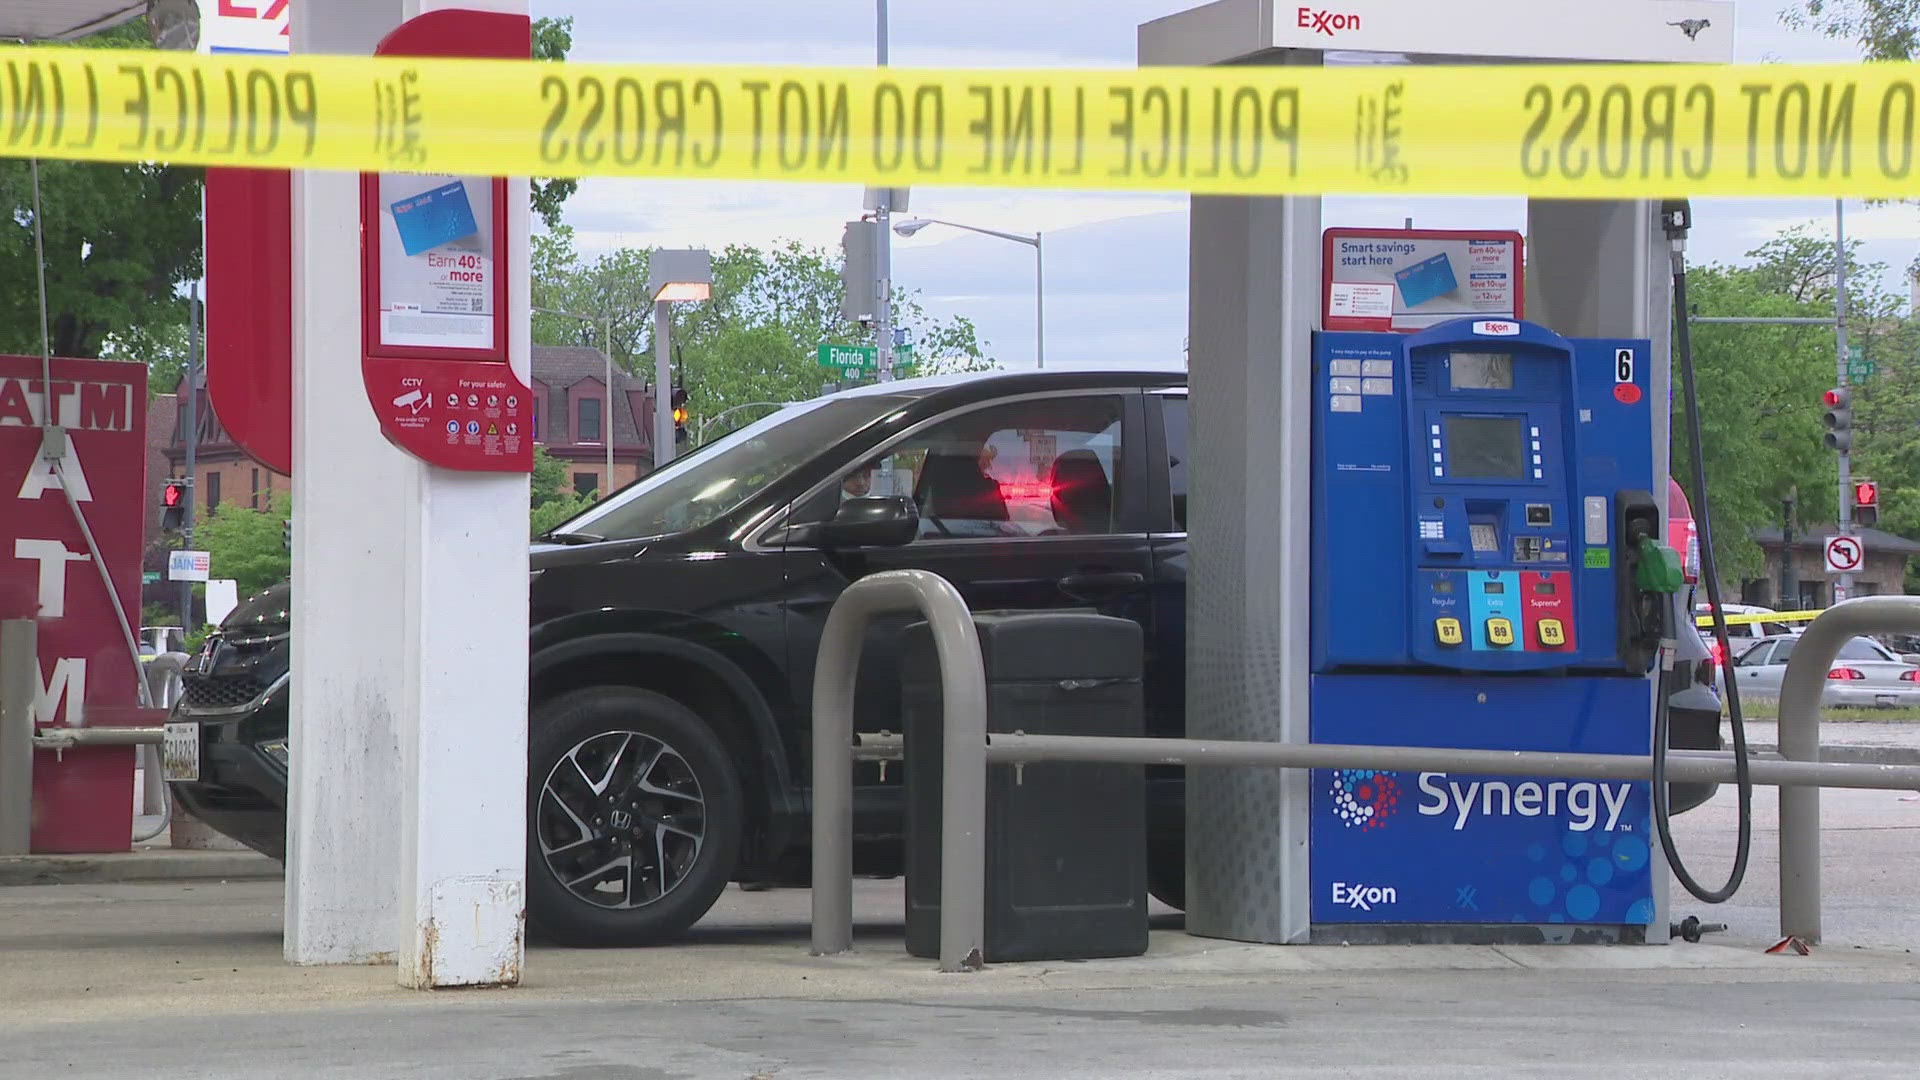 A man says he fought off a group of armed men at a gas station -- by spraying them with gasoline